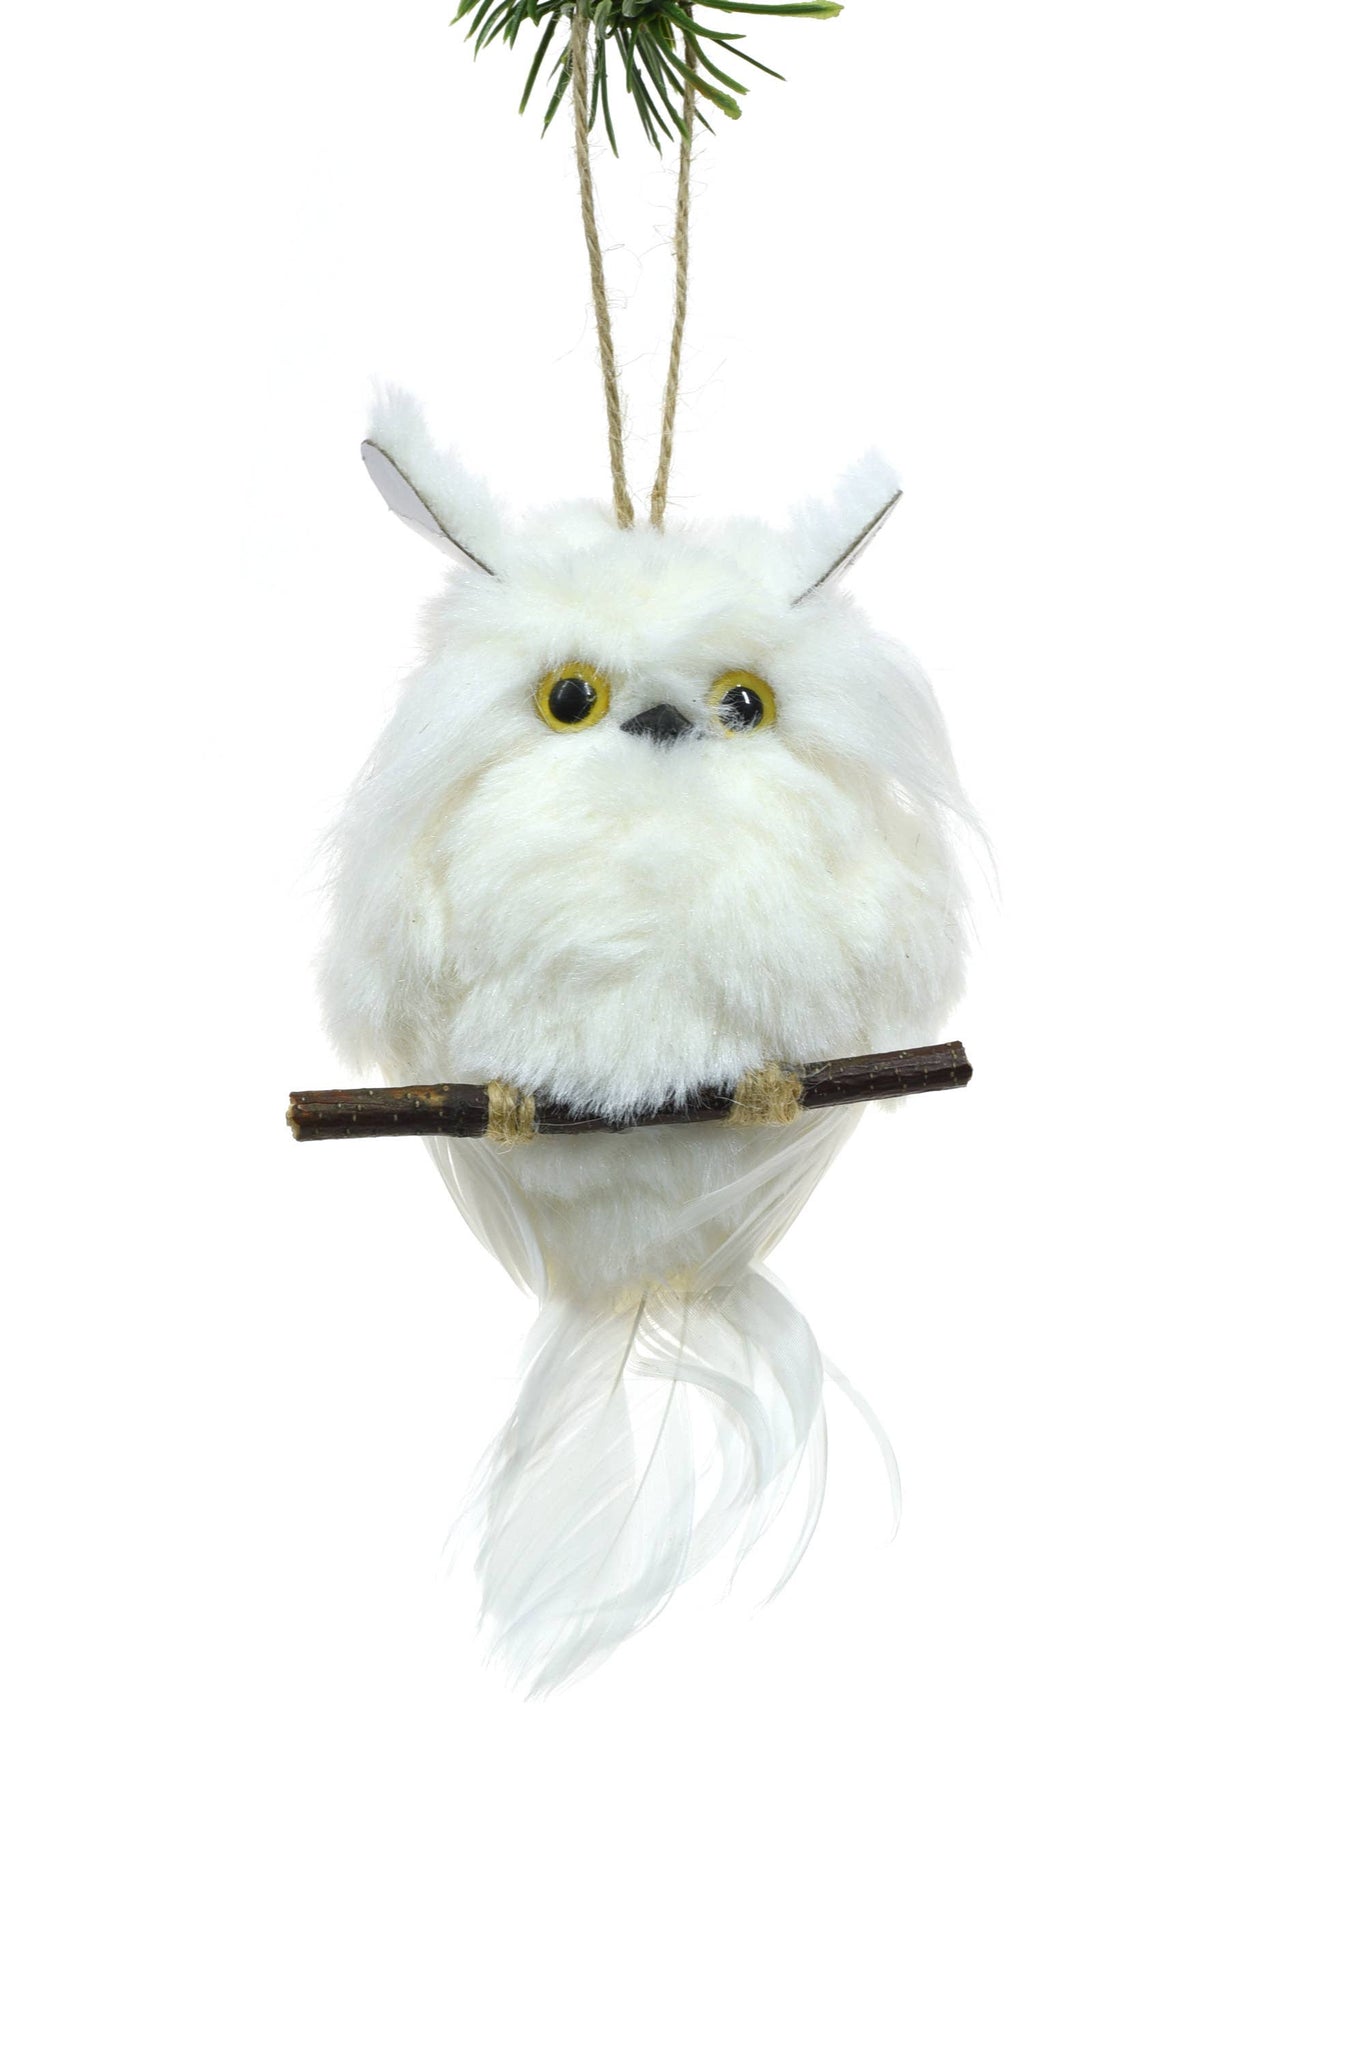 White Owl Ornament perched on Stick